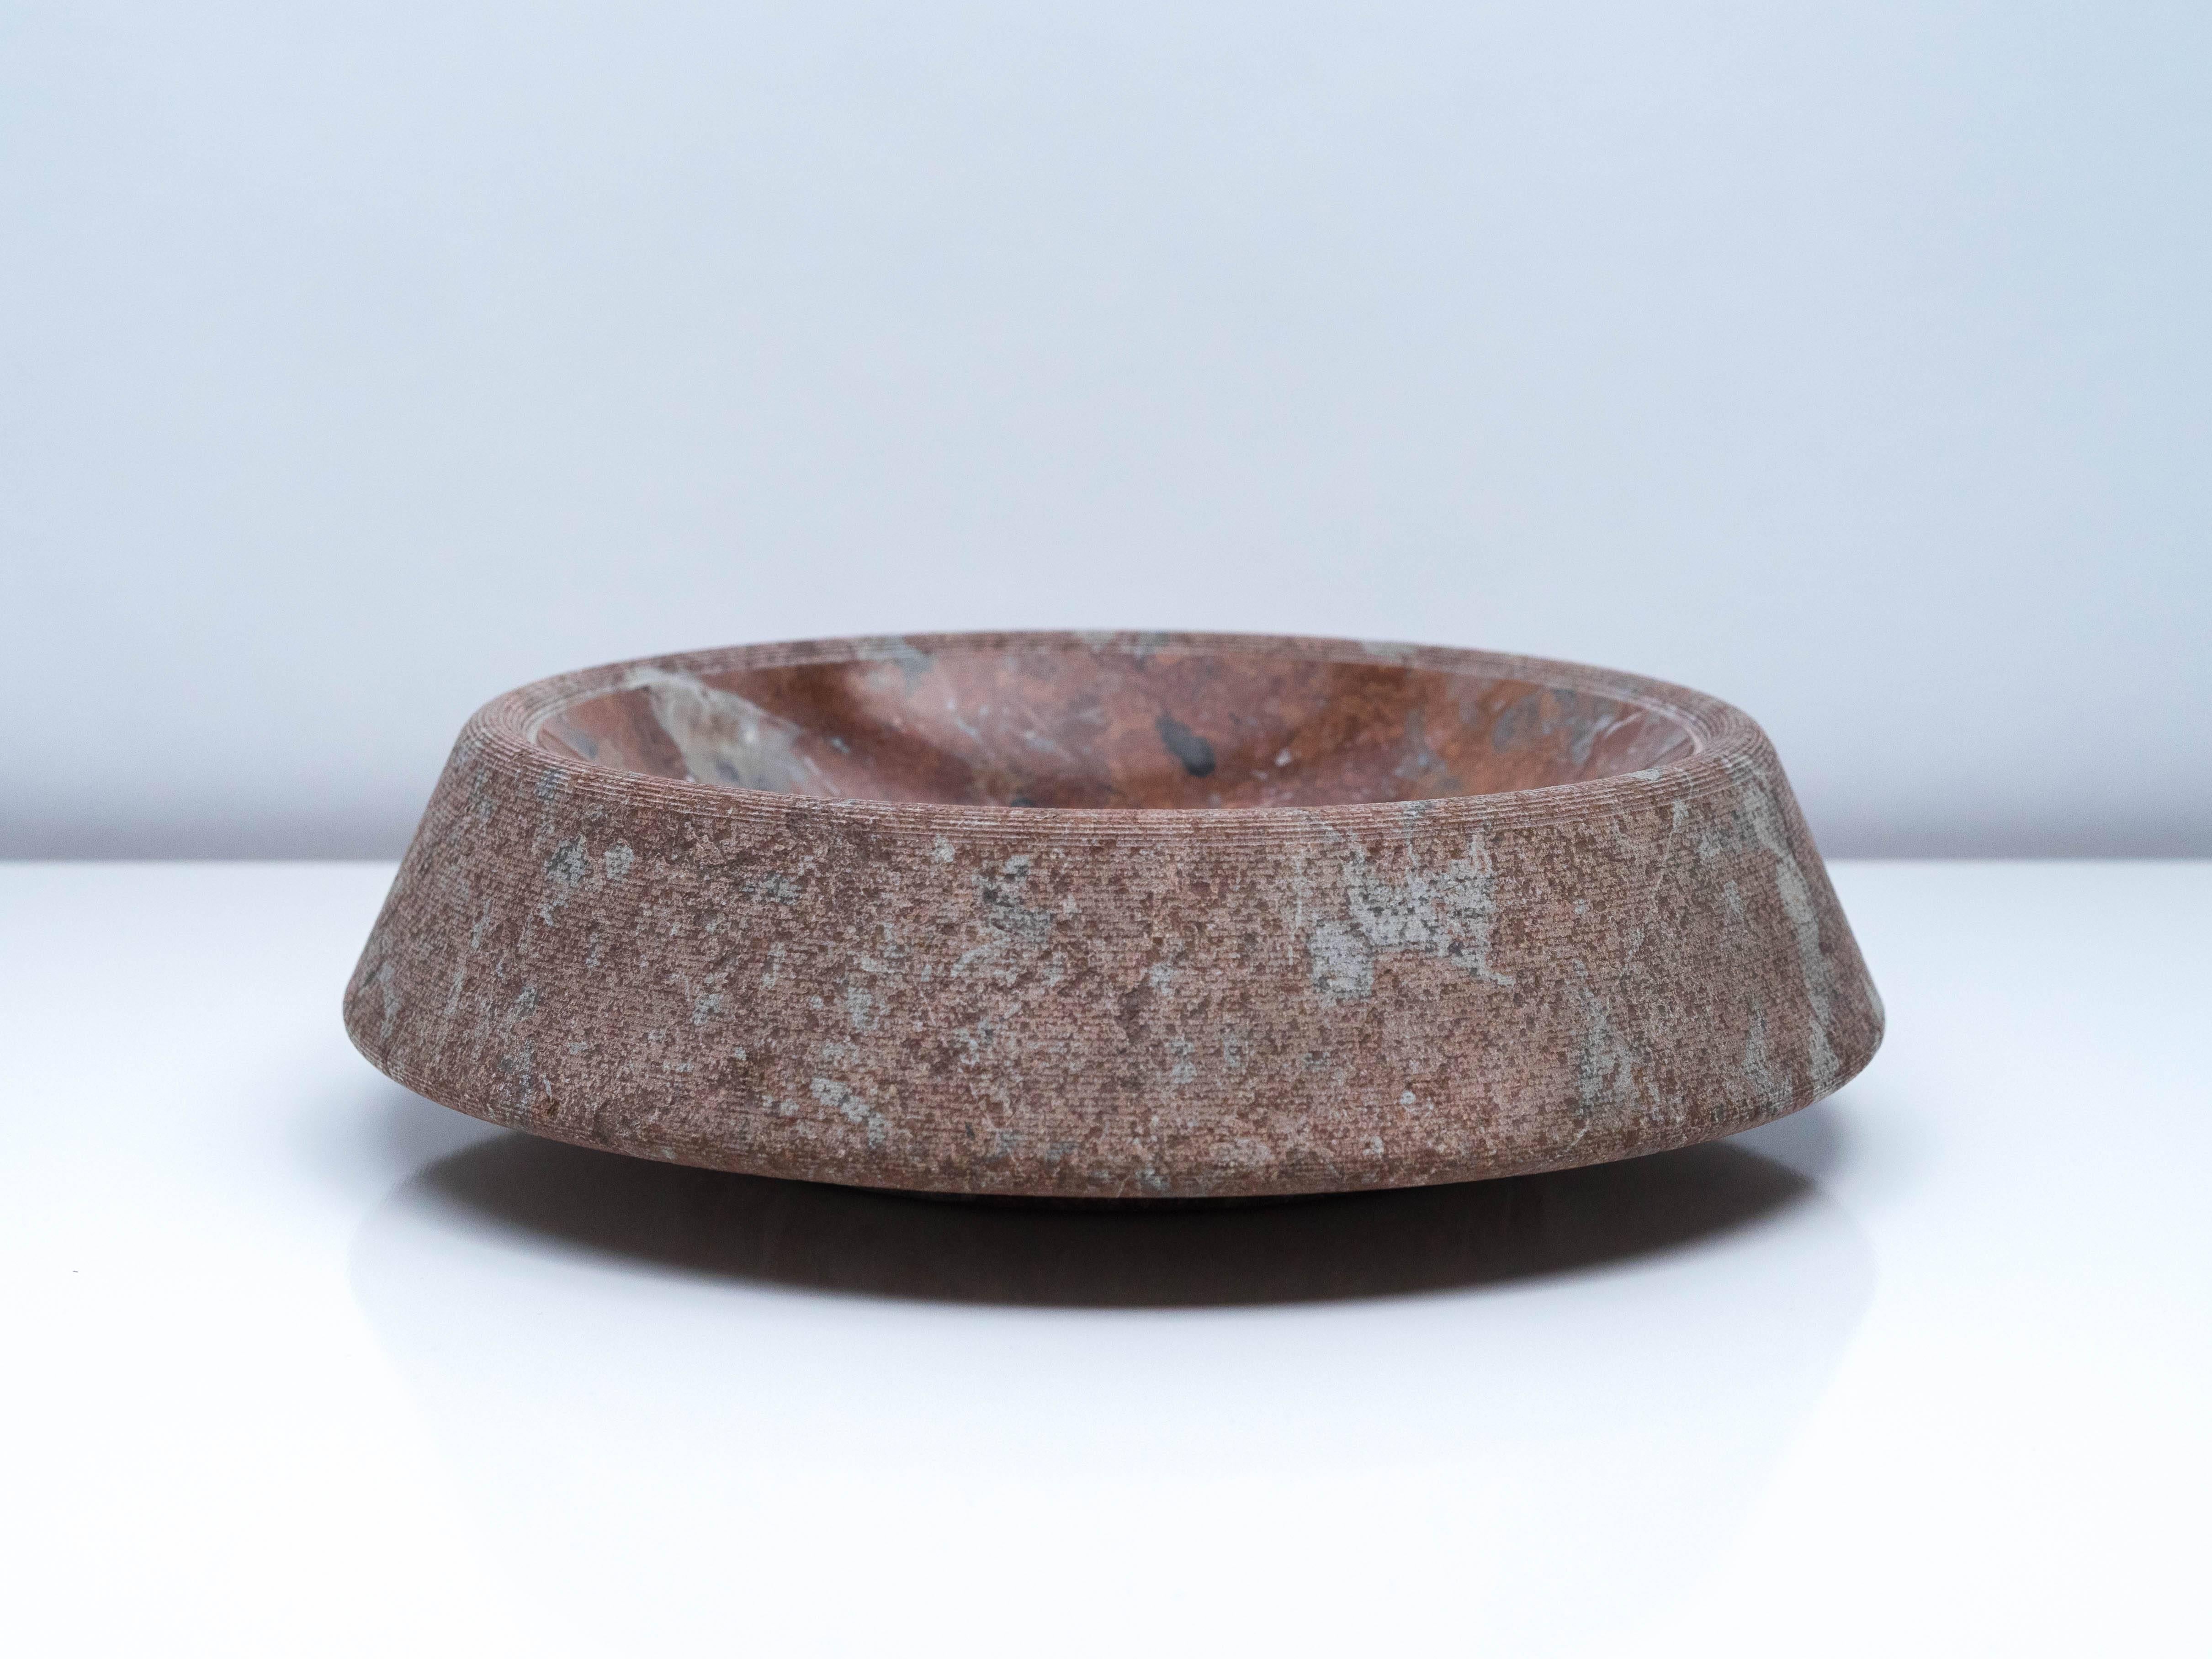 A large and impressive centrepiece designed by Giancarlo Cacciatori and produced by Italian stone specialists Up & Up in the 1970s. The red ochre and white-veined red Bilbao limestone bowl sits atop an inch-high support, giving the impression that